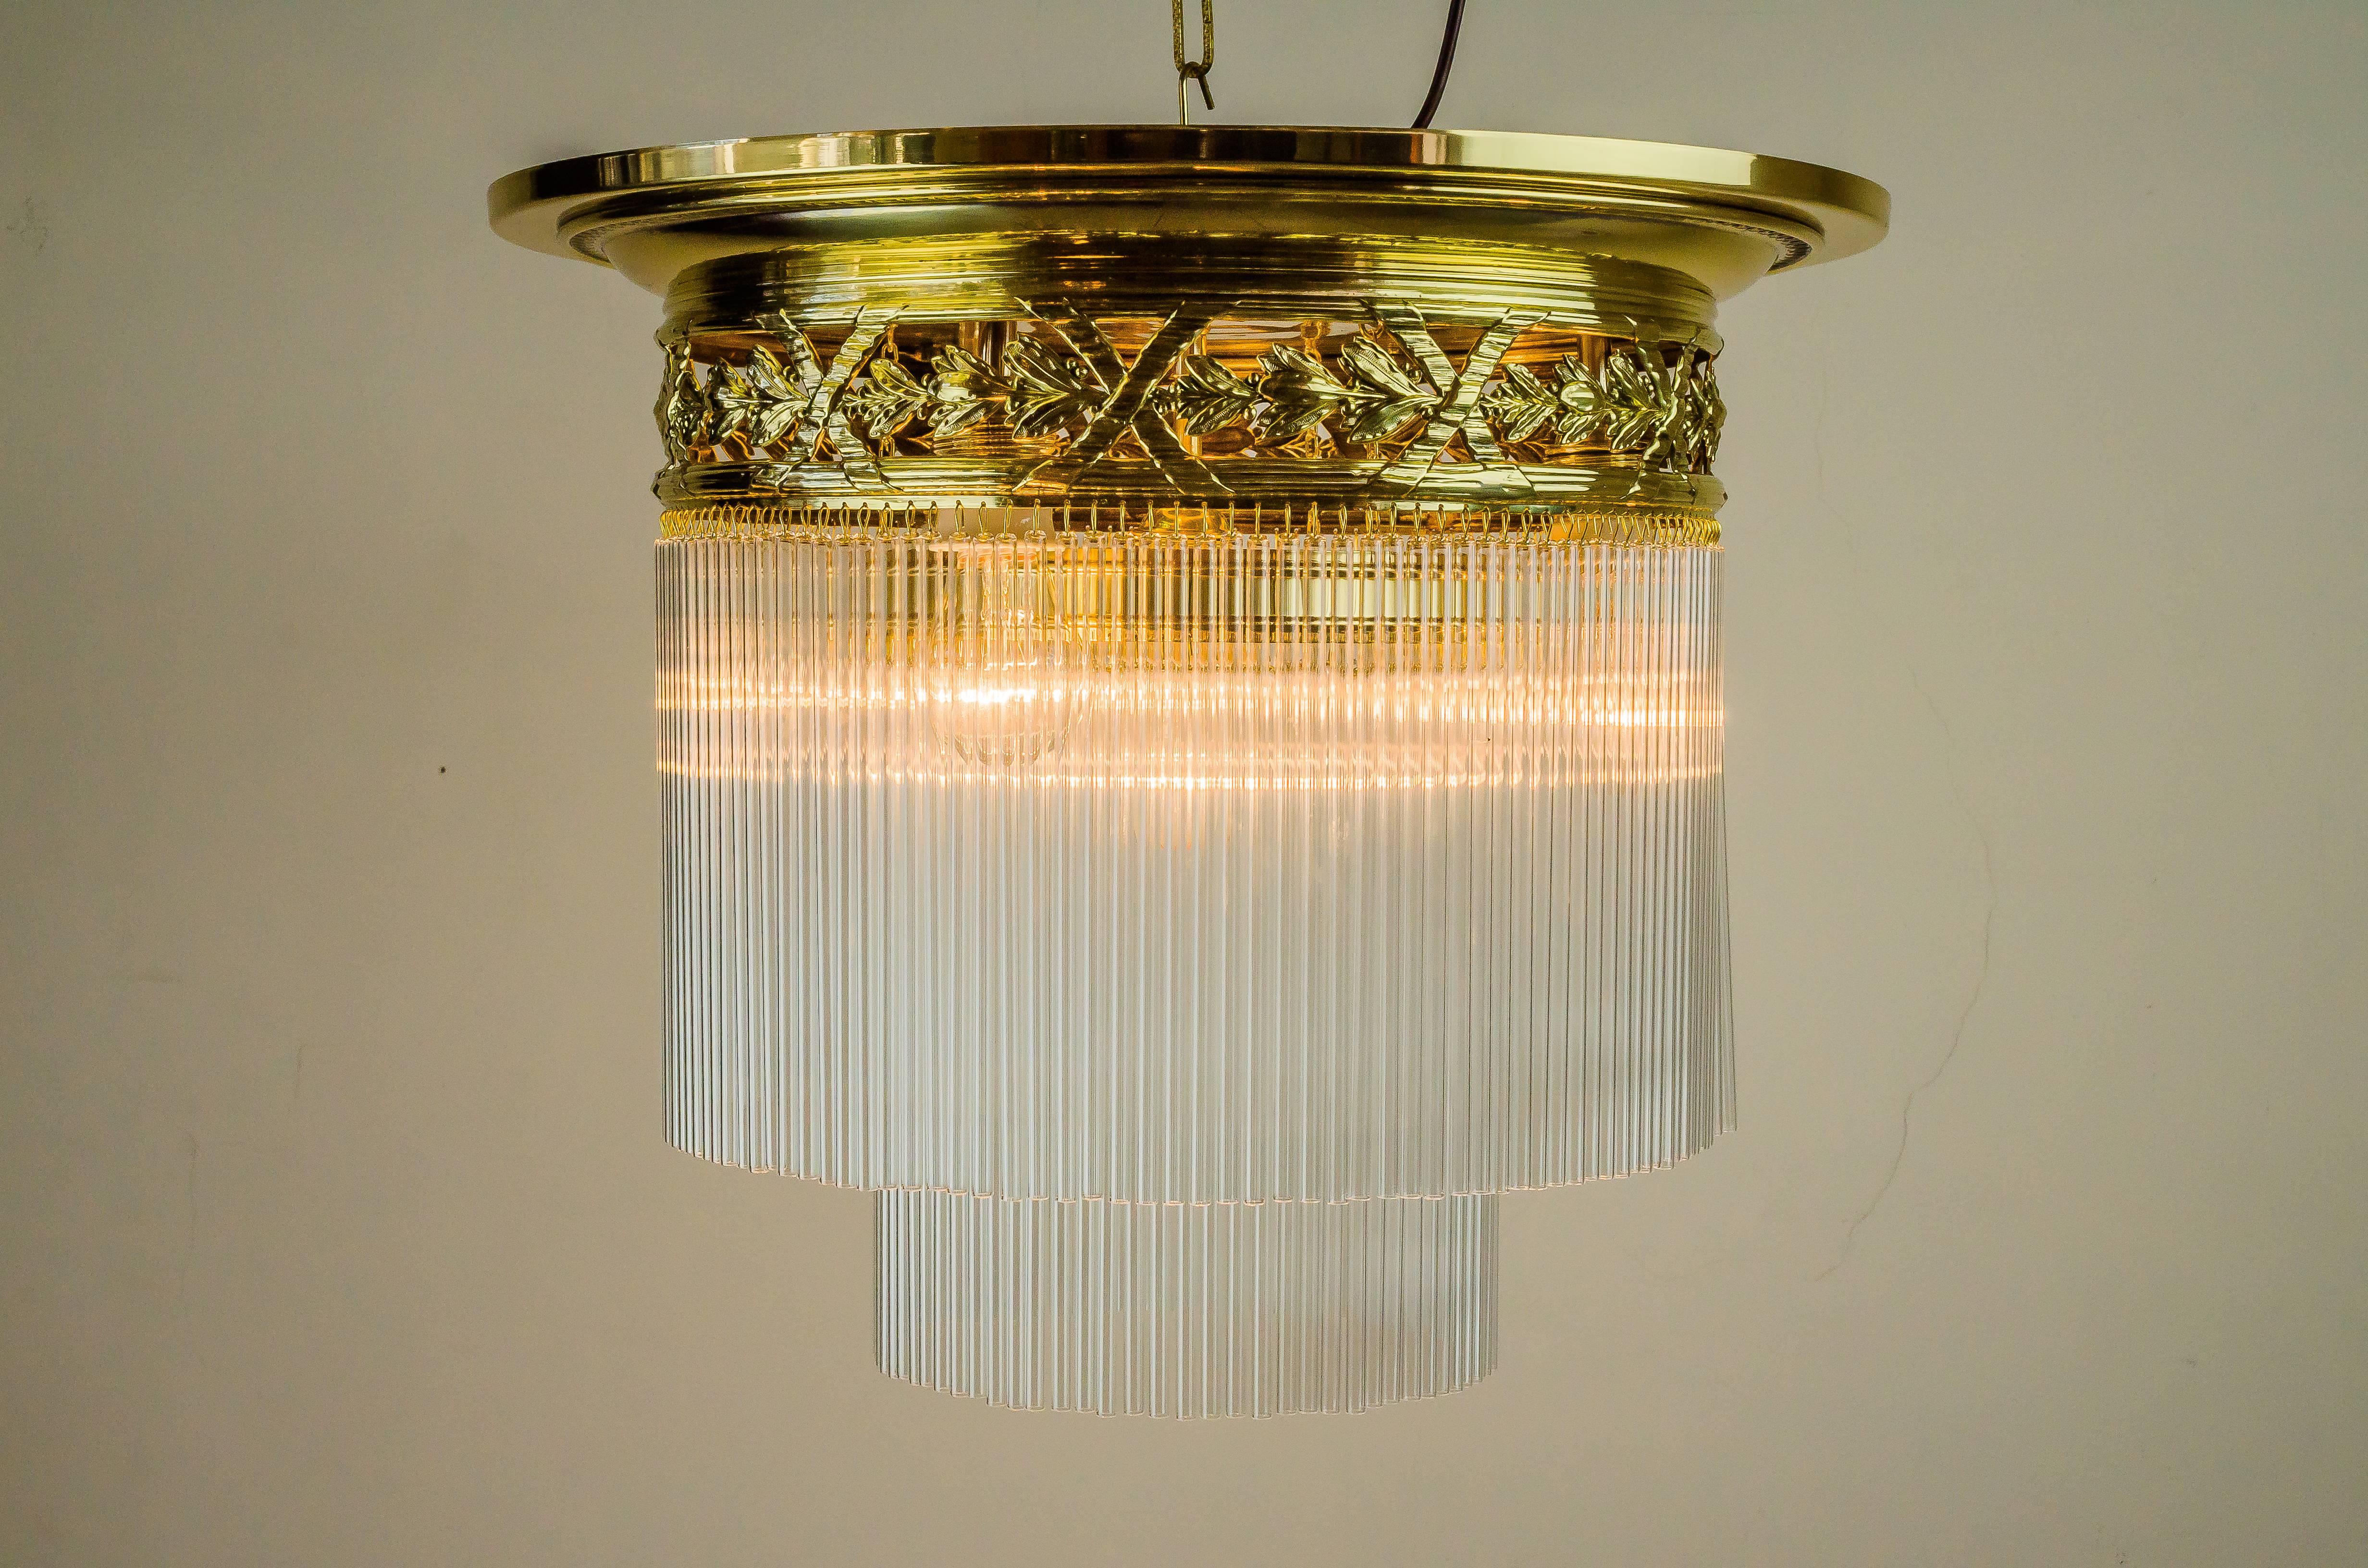 Beautiful and Big jugendstil ceiling lamp with glass sticks
polished and stove enameled
Glass sticks are replaced (new).